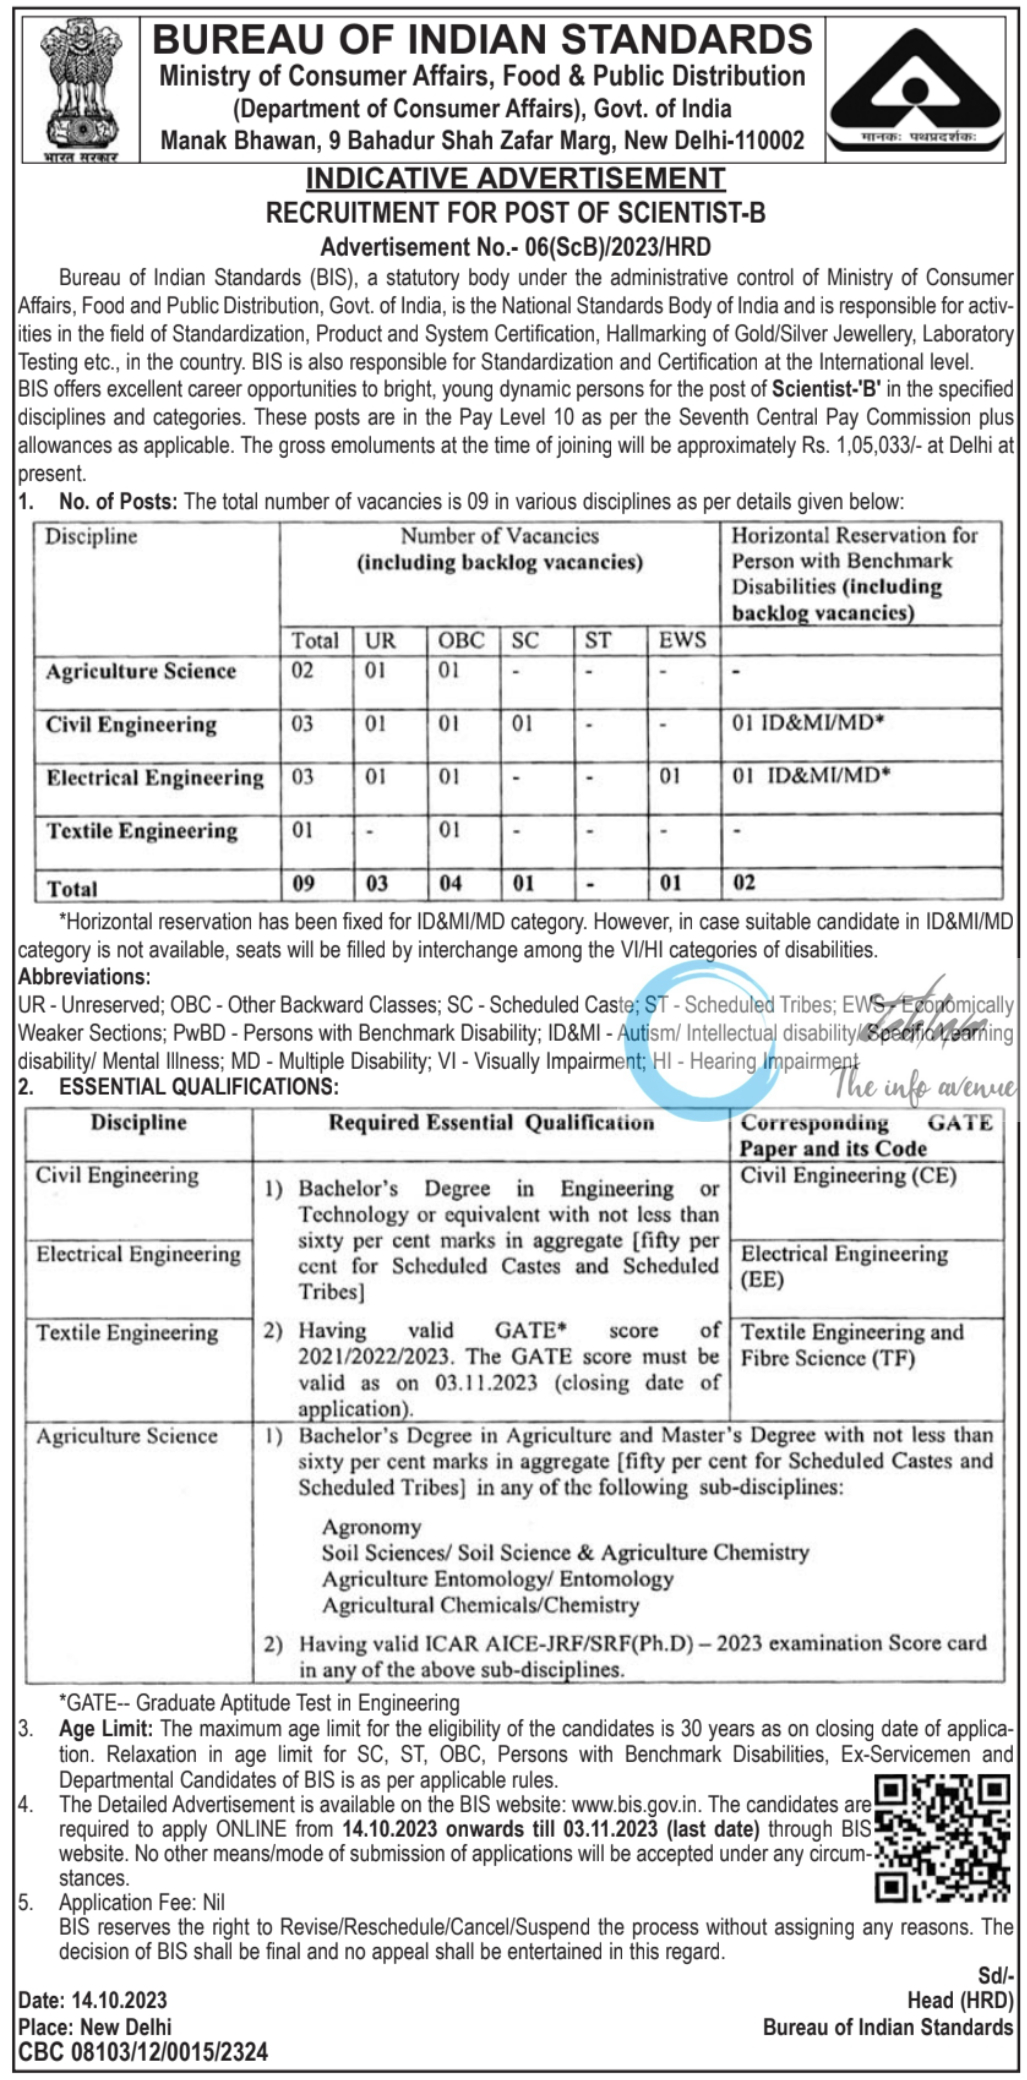 BUREAU OF INDIAN STANDARDS BIS ADVERTISEMENT RECRUITMENT NO 06 OF 2023 FOR POST OF SCIENTIST-B